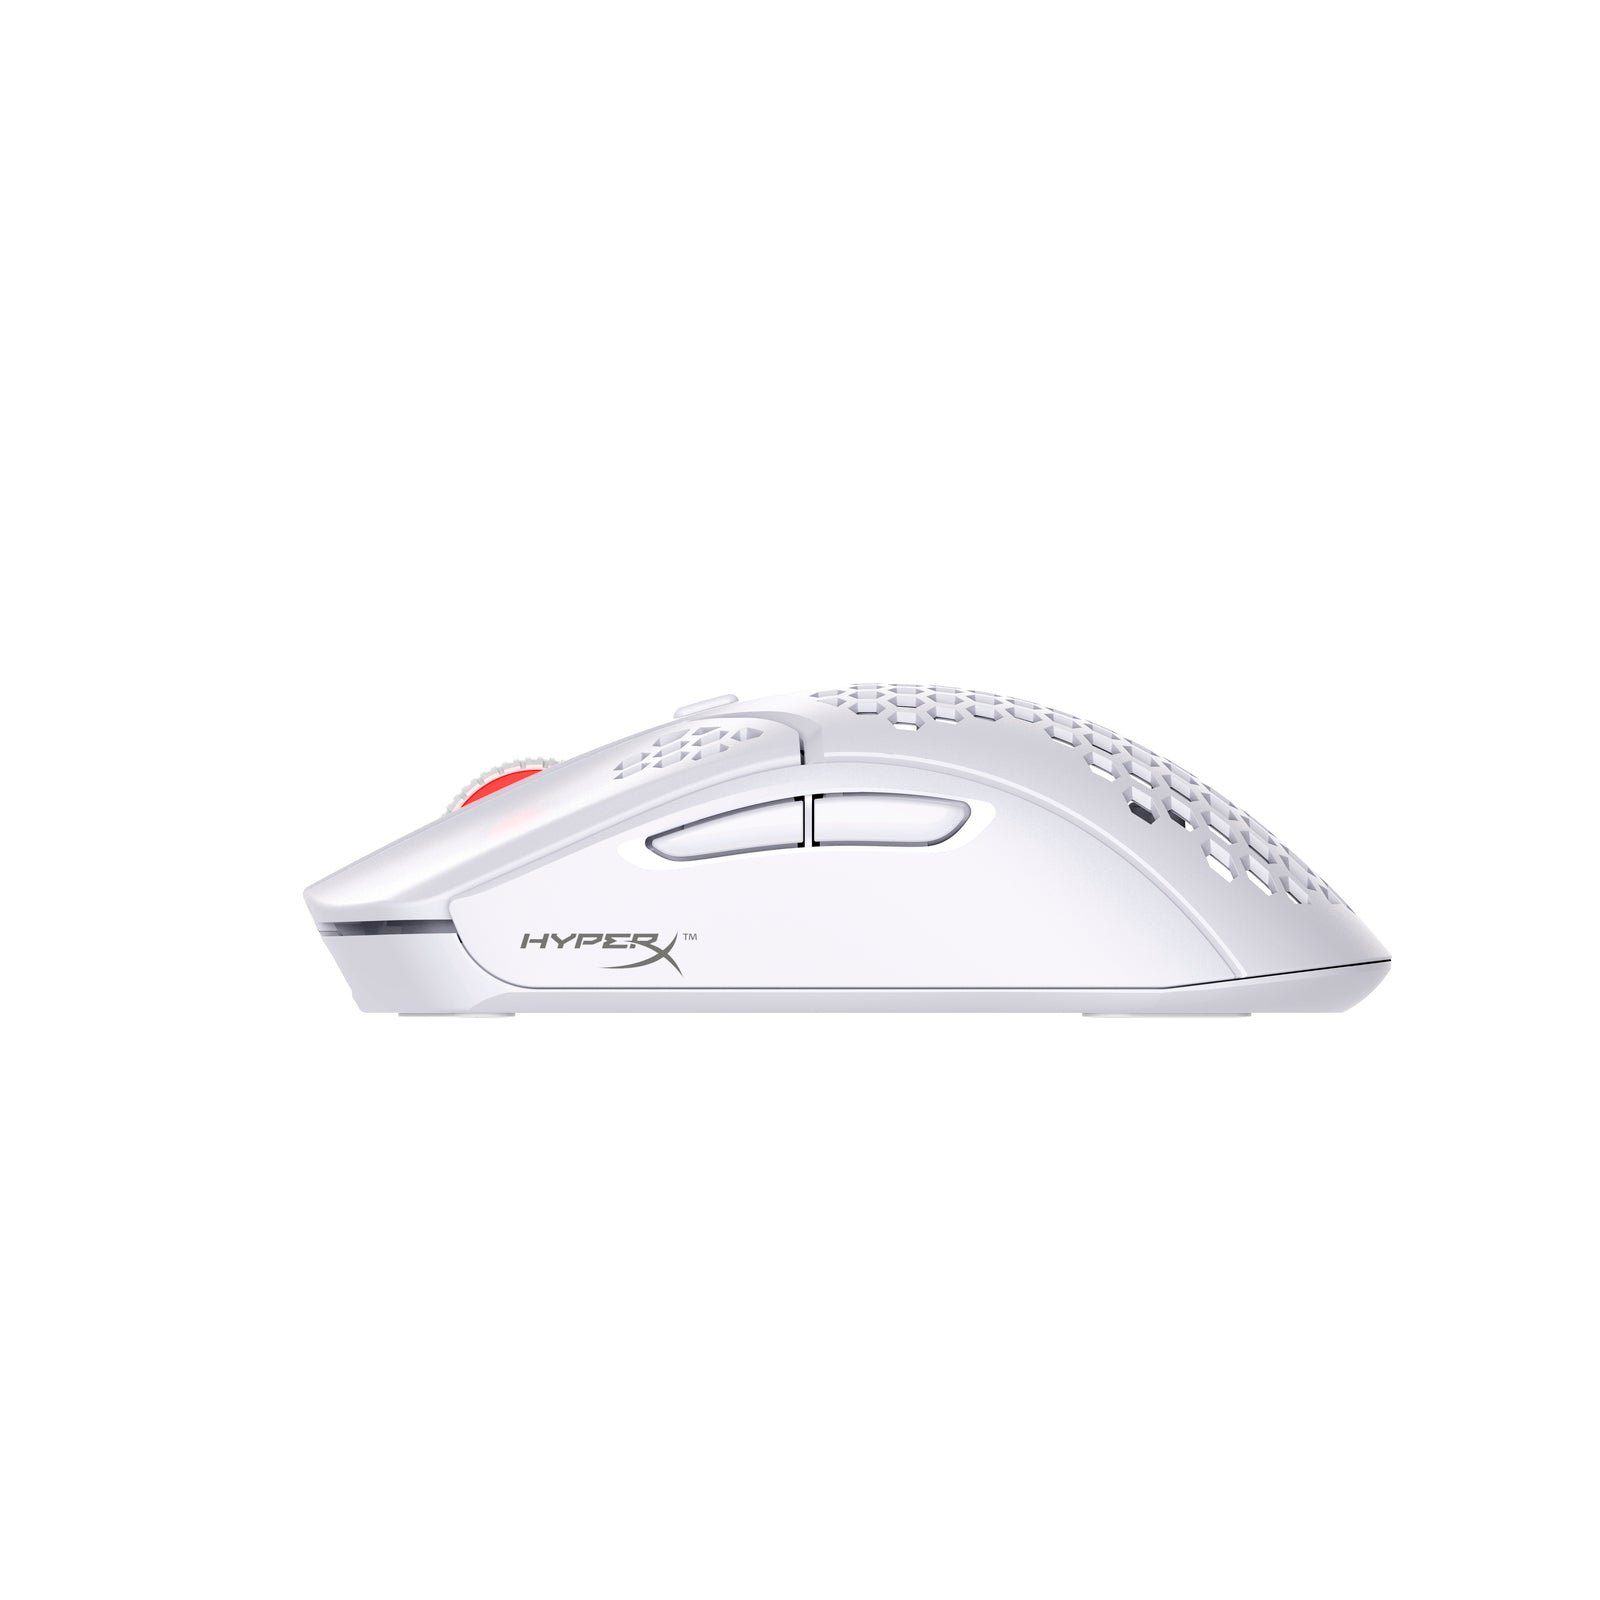 HyperX Pulsefire Haste Wireless White gaming mouse, side view, pointing left